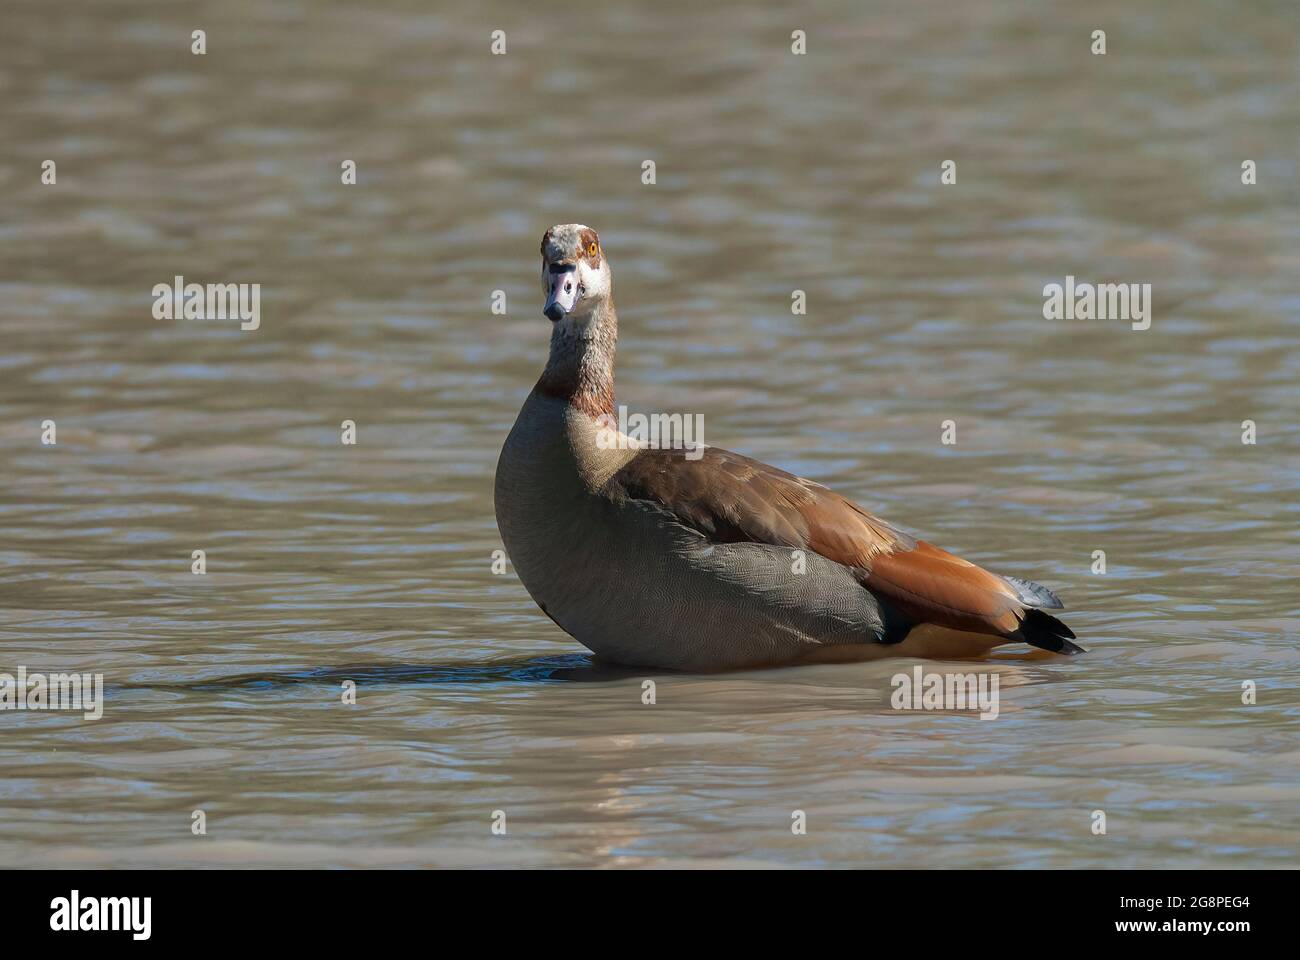 Egyptian Goose , Alopochen aegyptiaca , in wetland environment, Kruger National Park, South Africa. Stock Photo